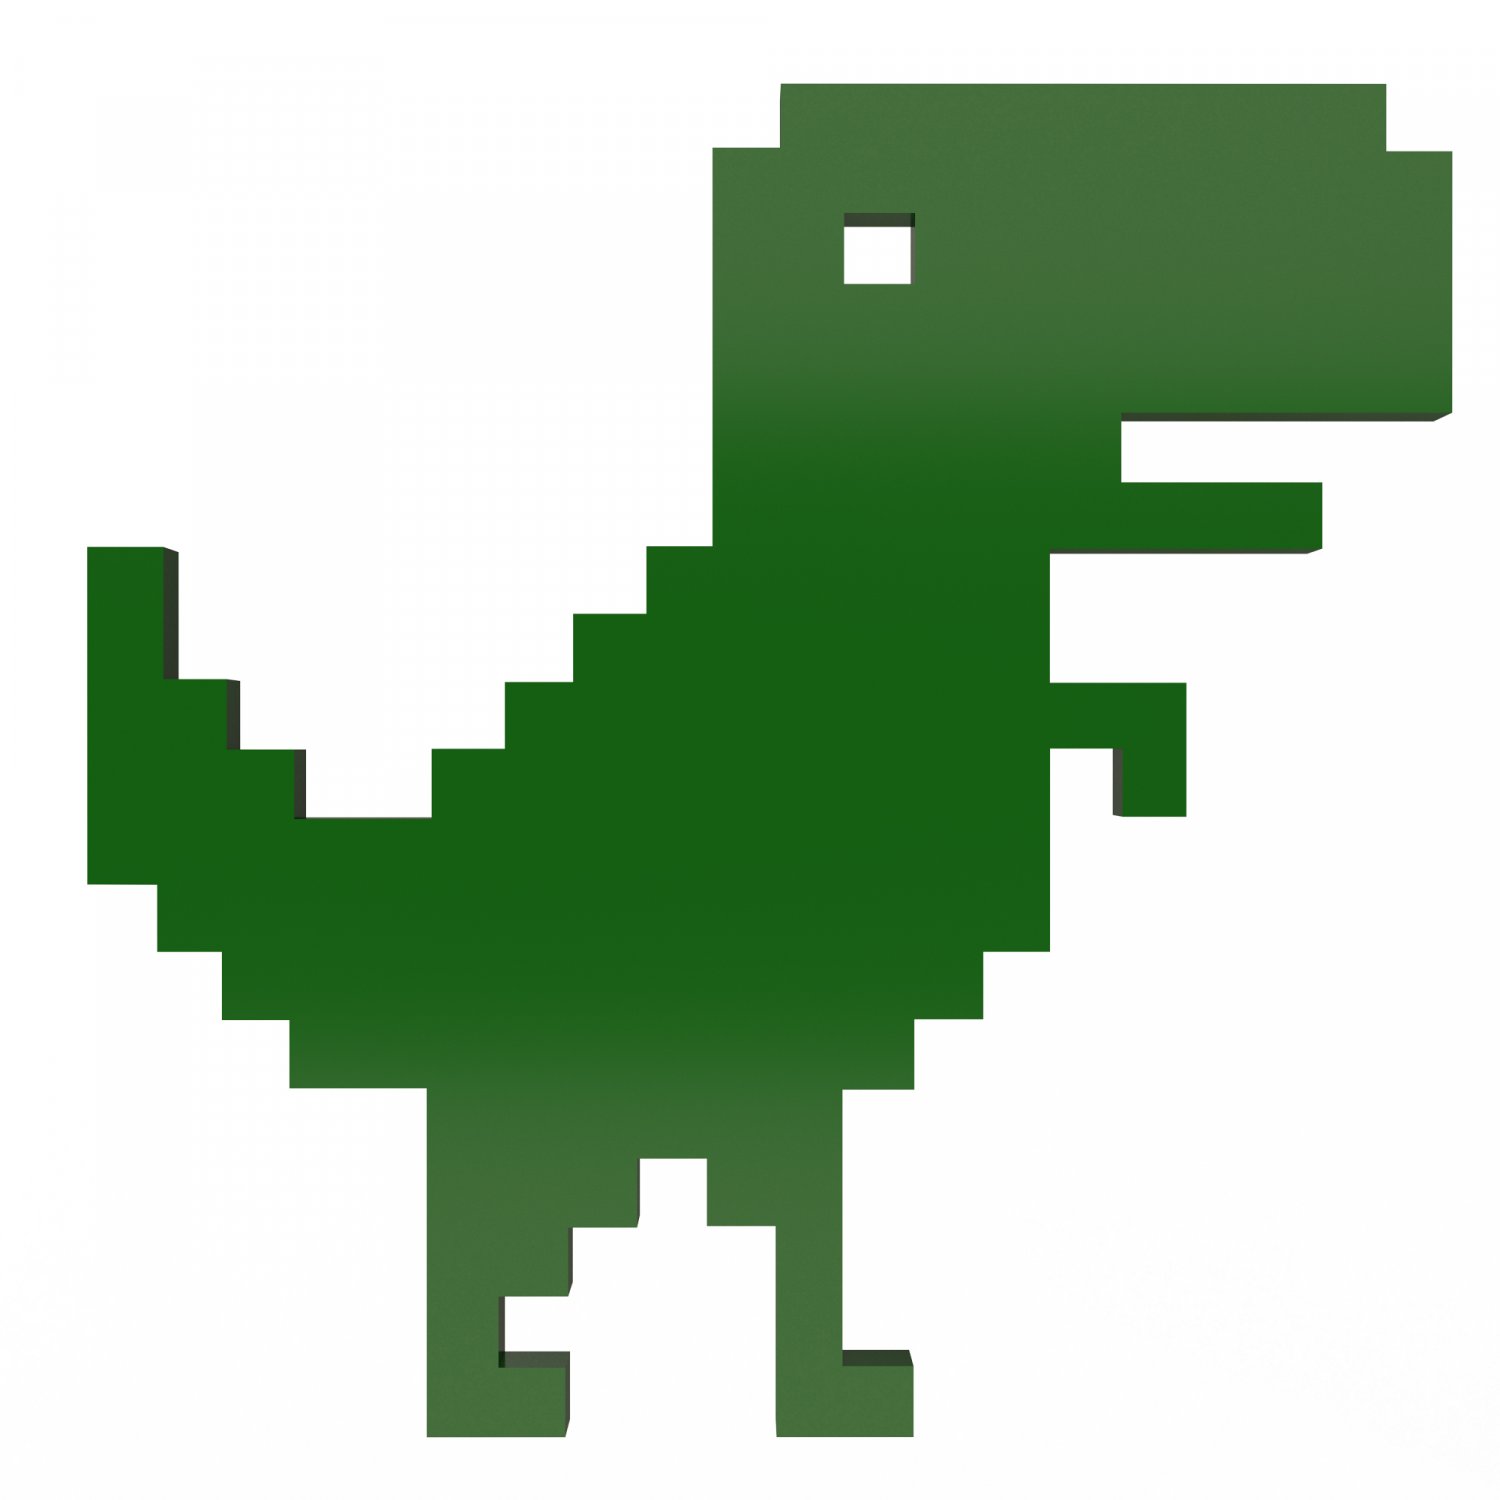 Free] [Android] Dino T-Rex 3D Run